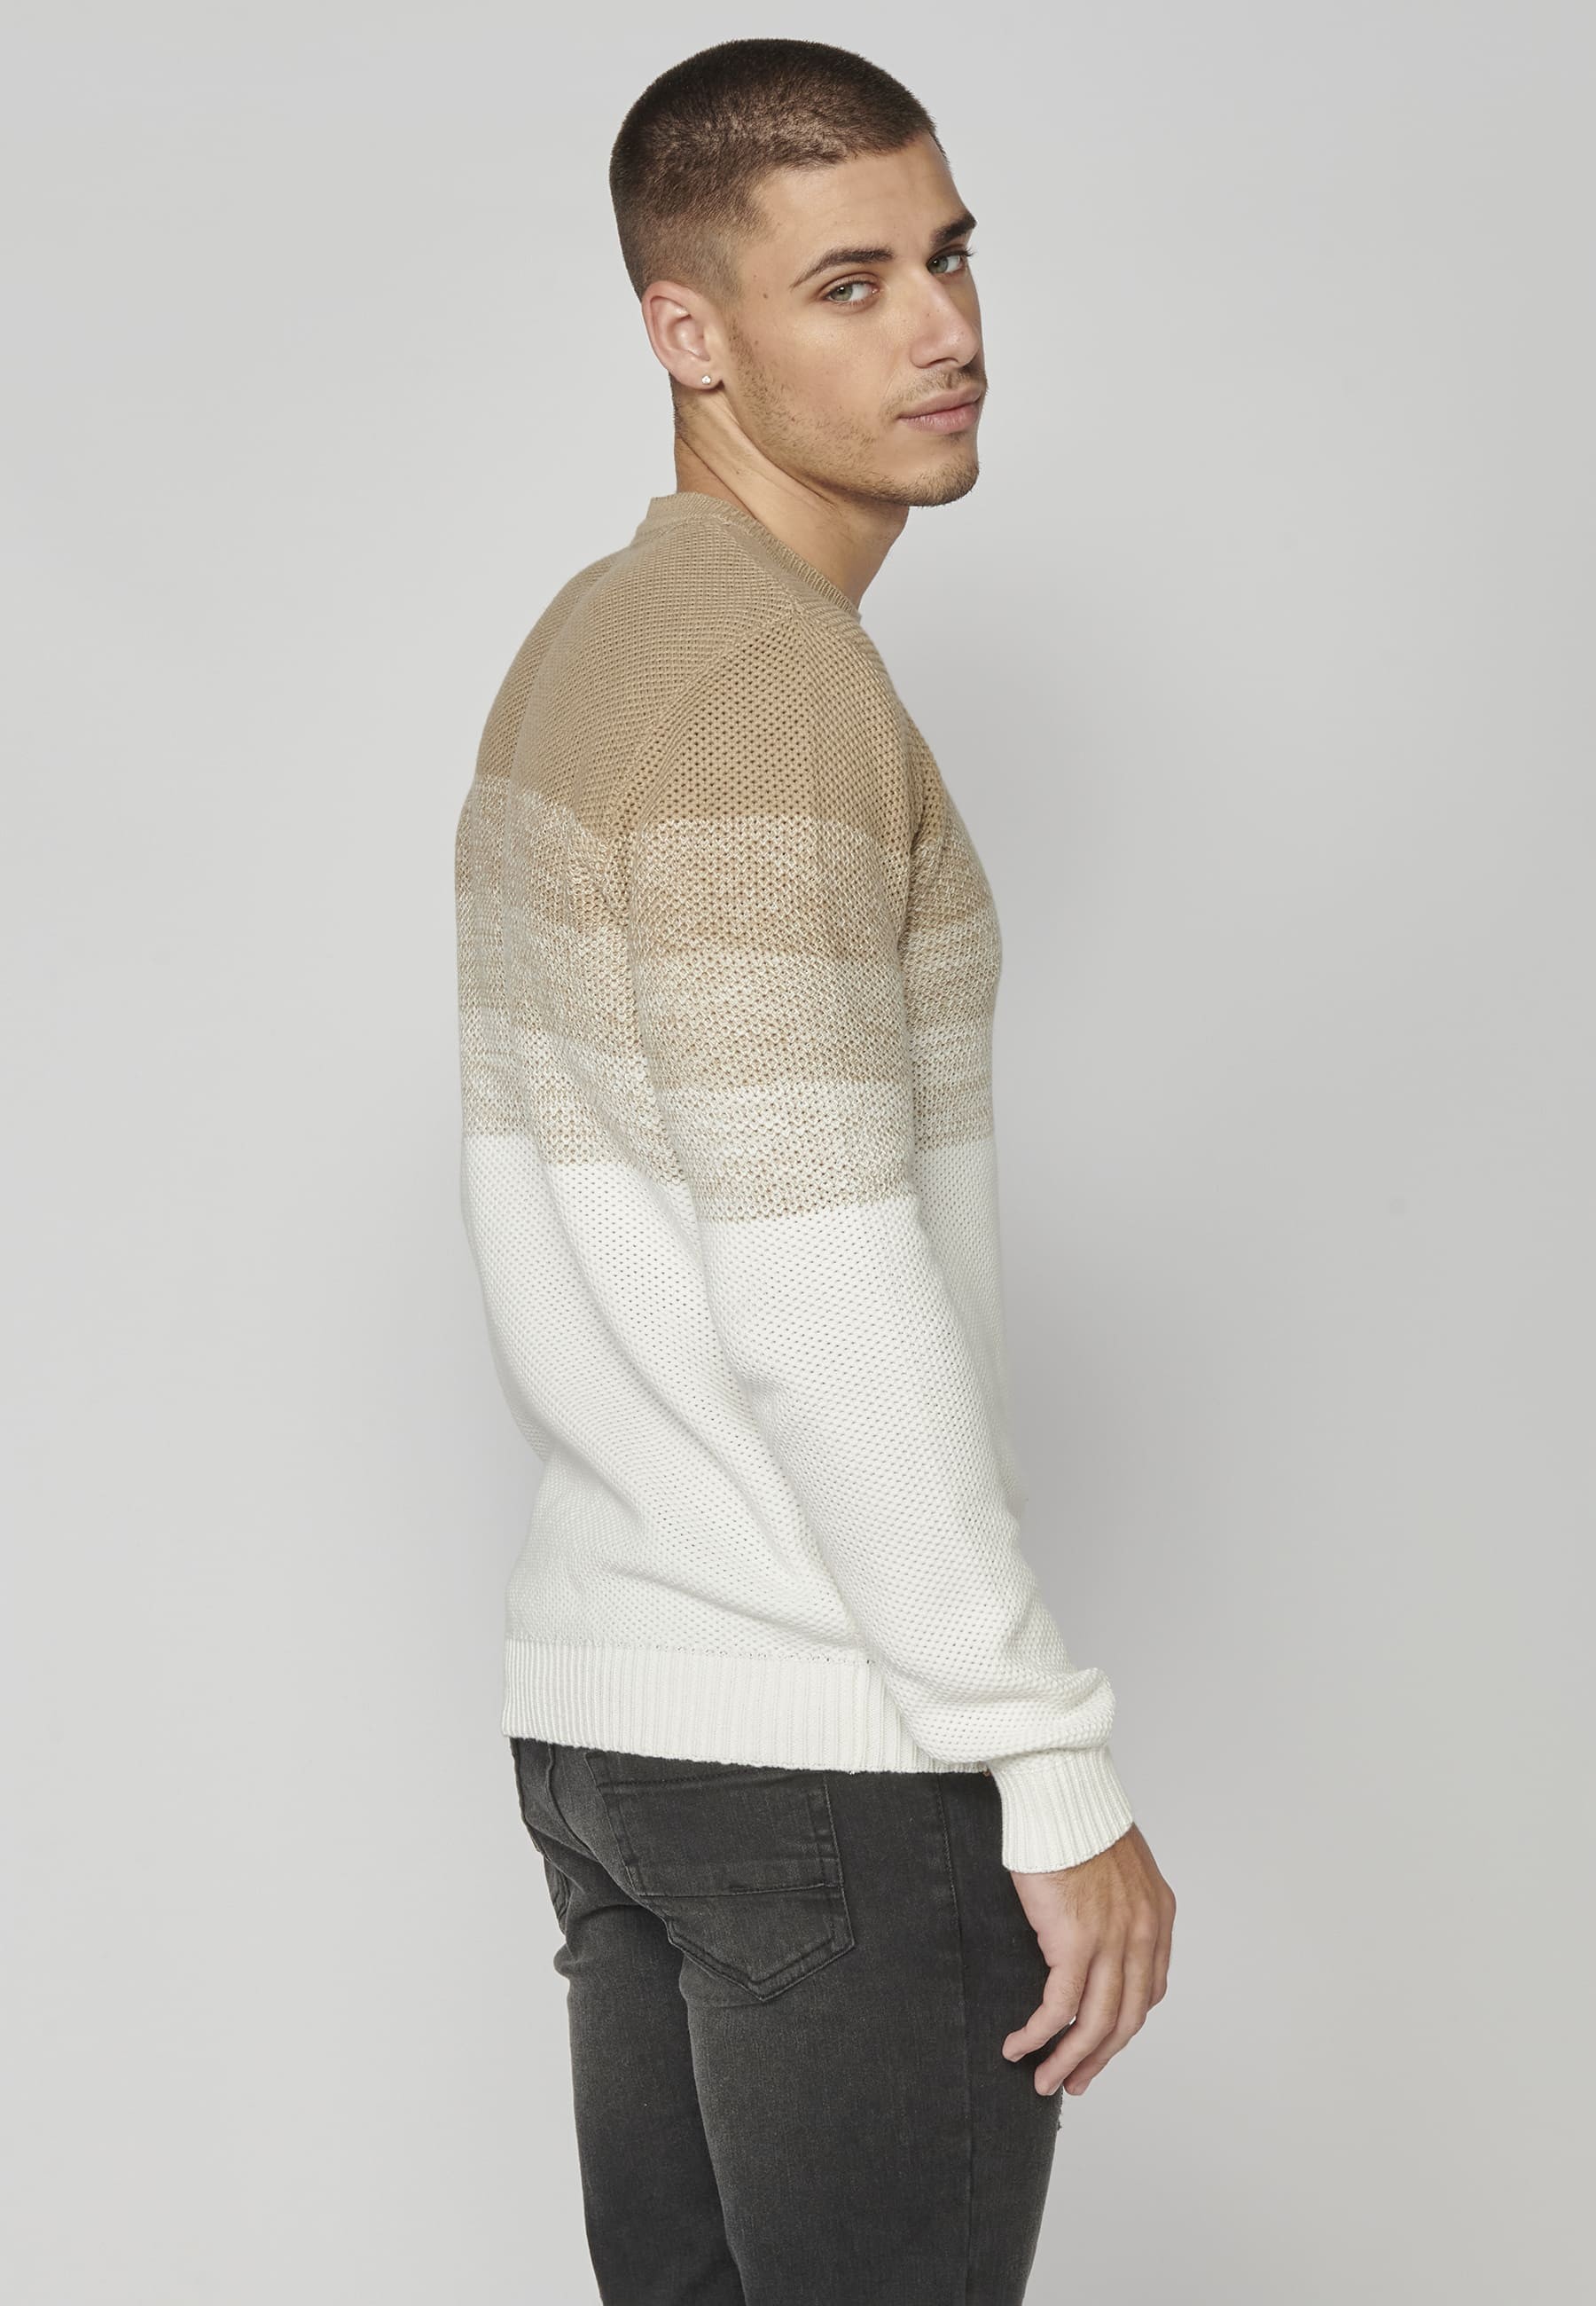 Beige Cotton Knitted Sweater for Man